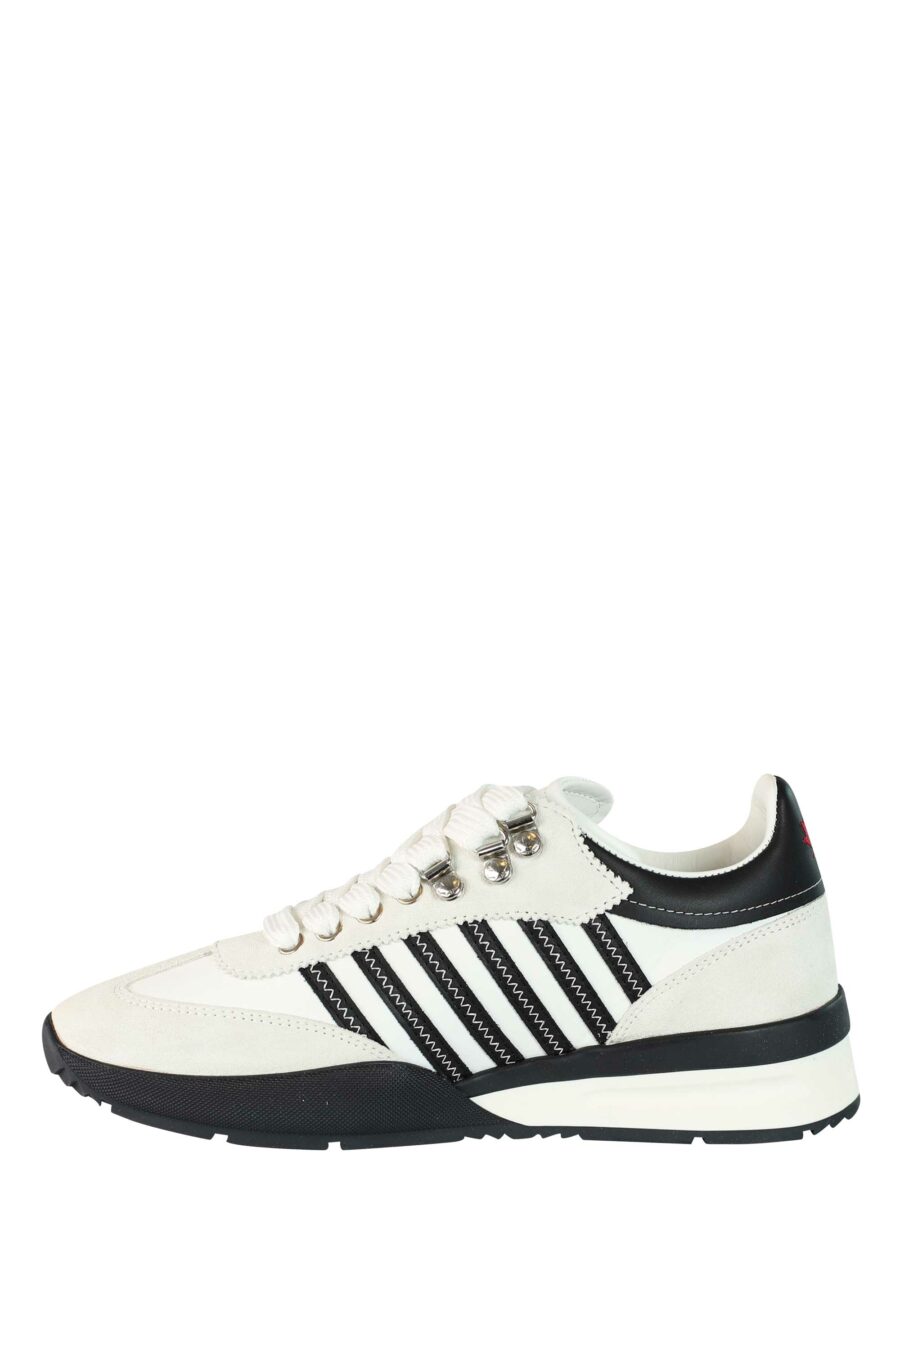 Trainers white mix "original legend" with two-tone sole and diagonal lines - 8055777186879 3